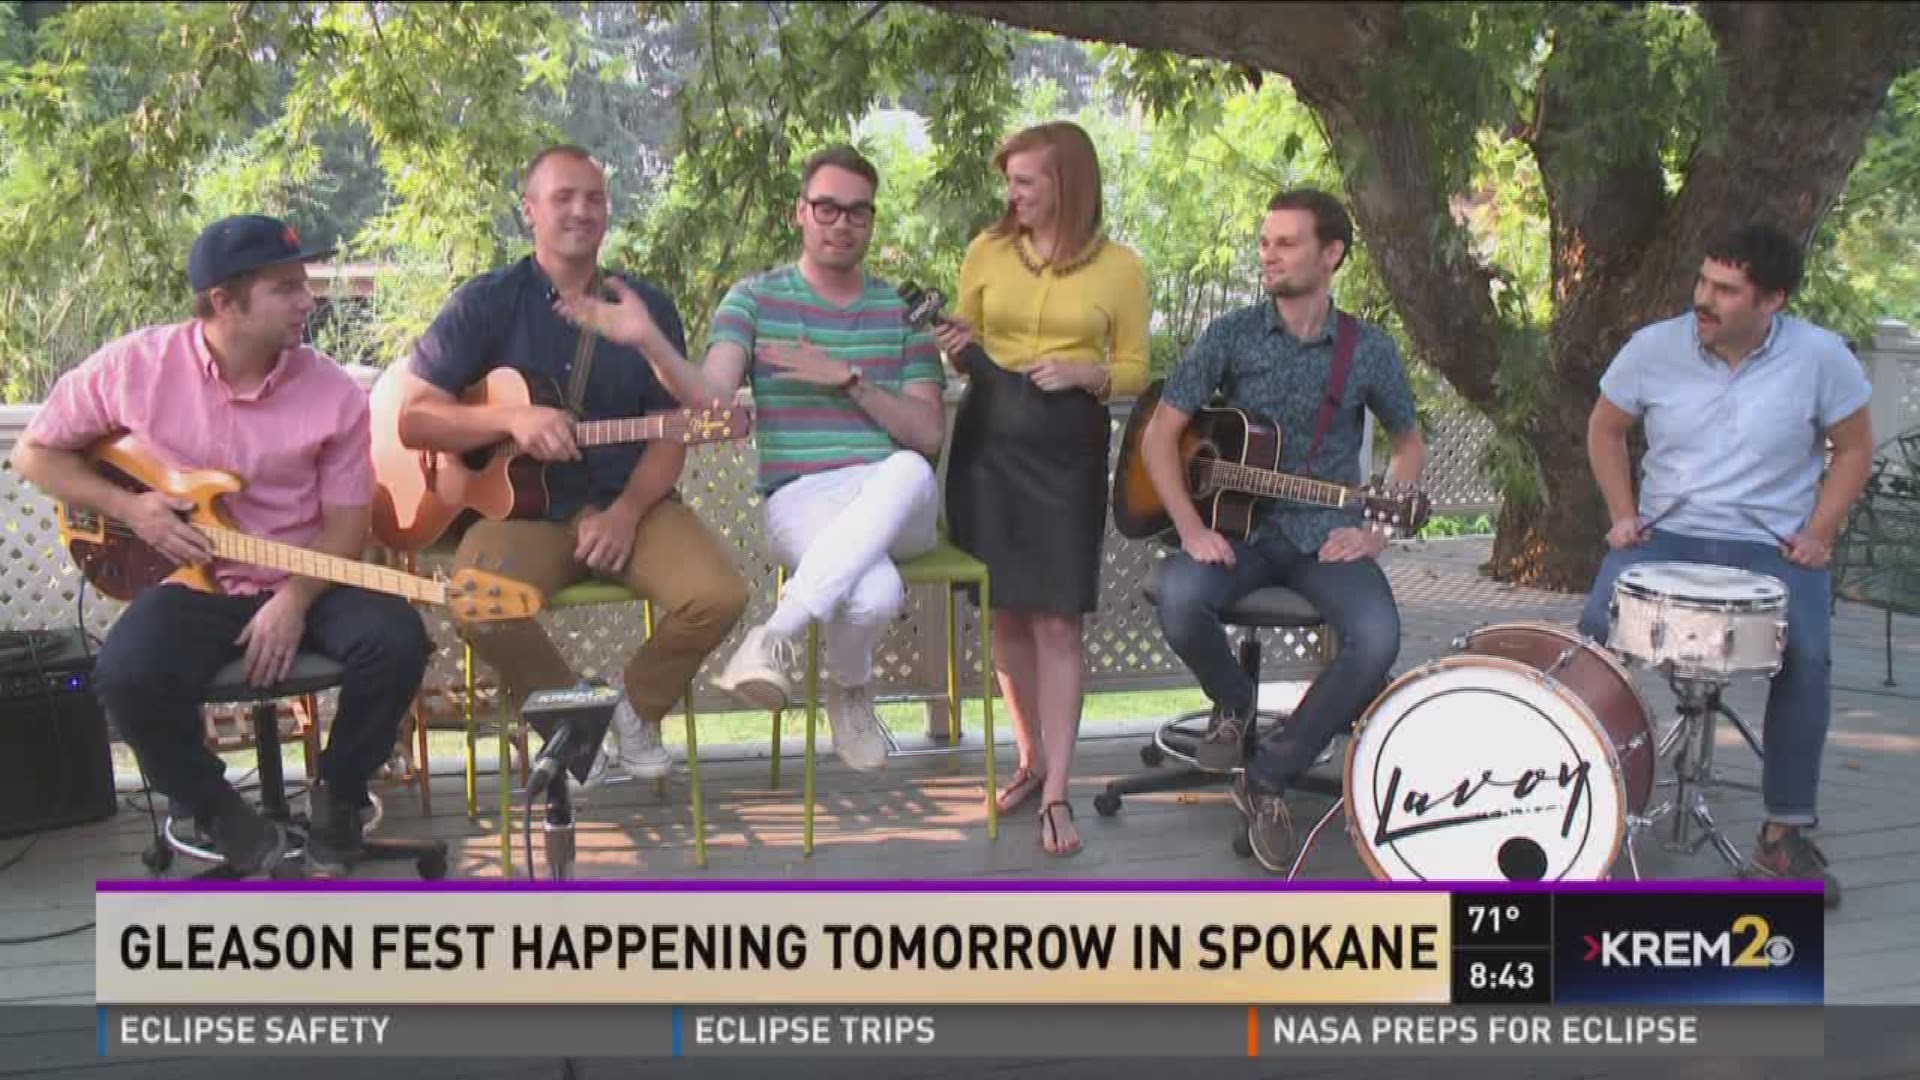 KREM 2's Jen York talks to the band Lavoy about living in Spokane and the band. Then they perform.